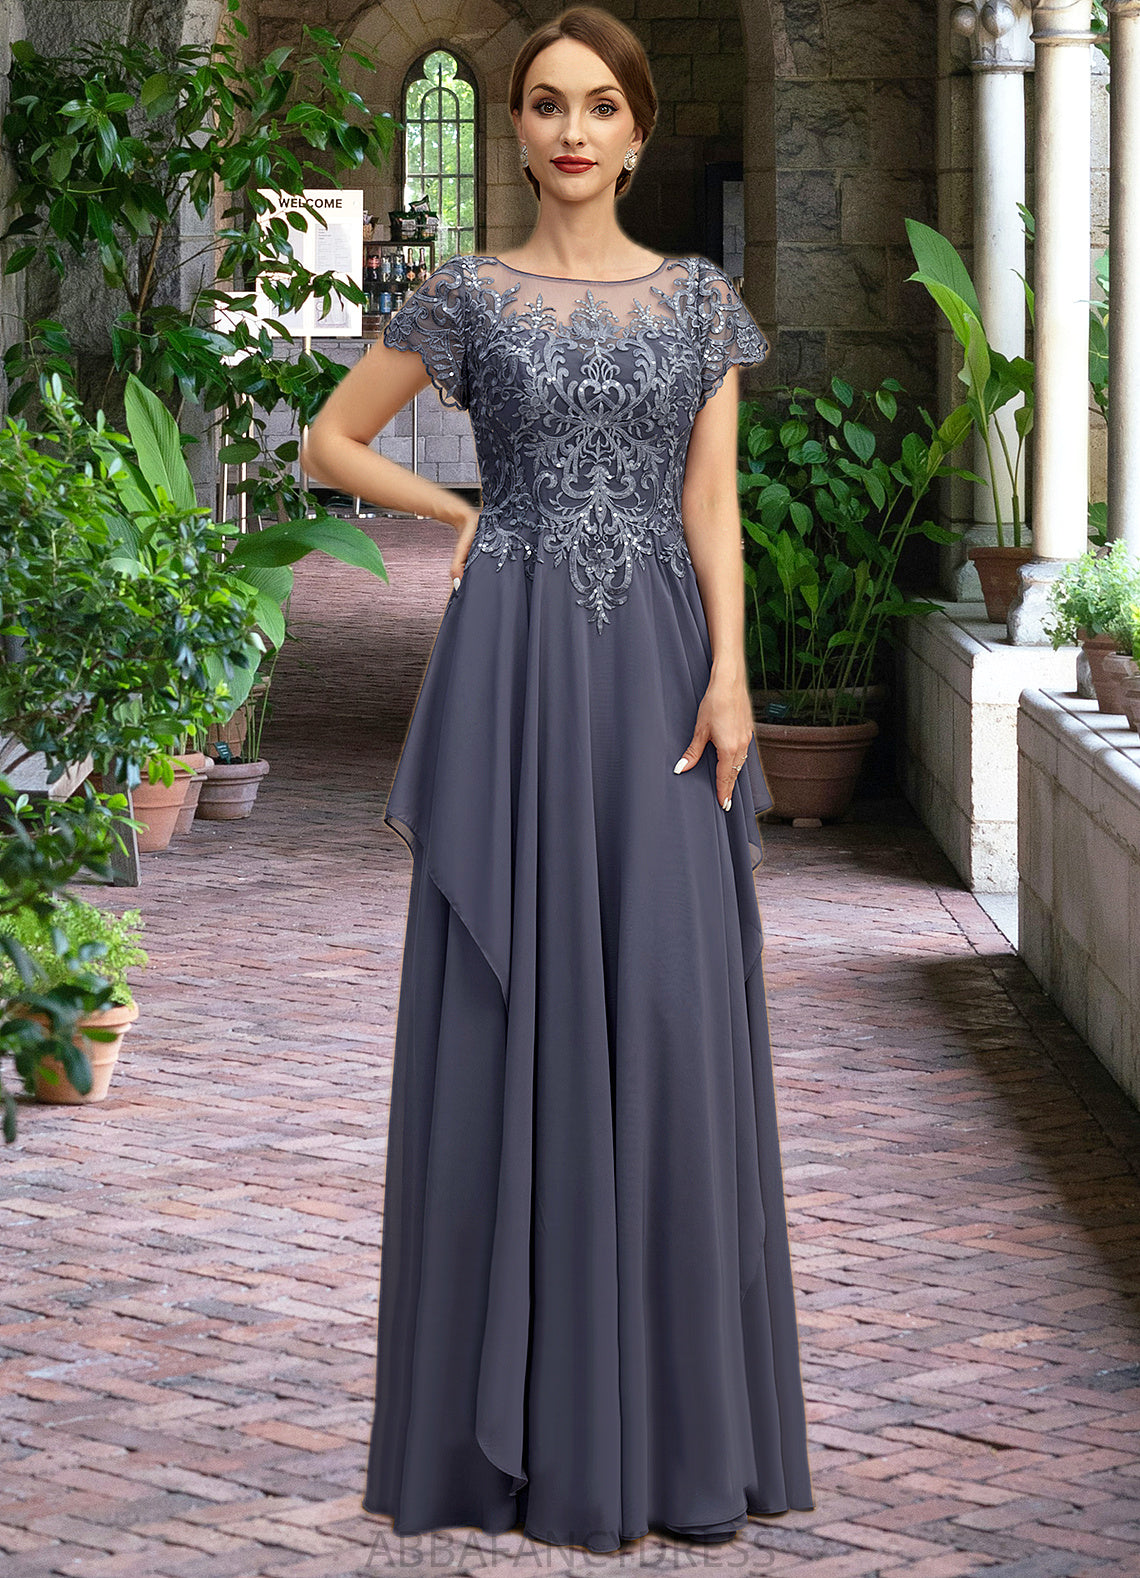 Kaleigh A-line Scoop Illusion Floor-Length Chiffon Lace Mother of the Bride Dress With Cascading Ruffles Sequins DRP0021897